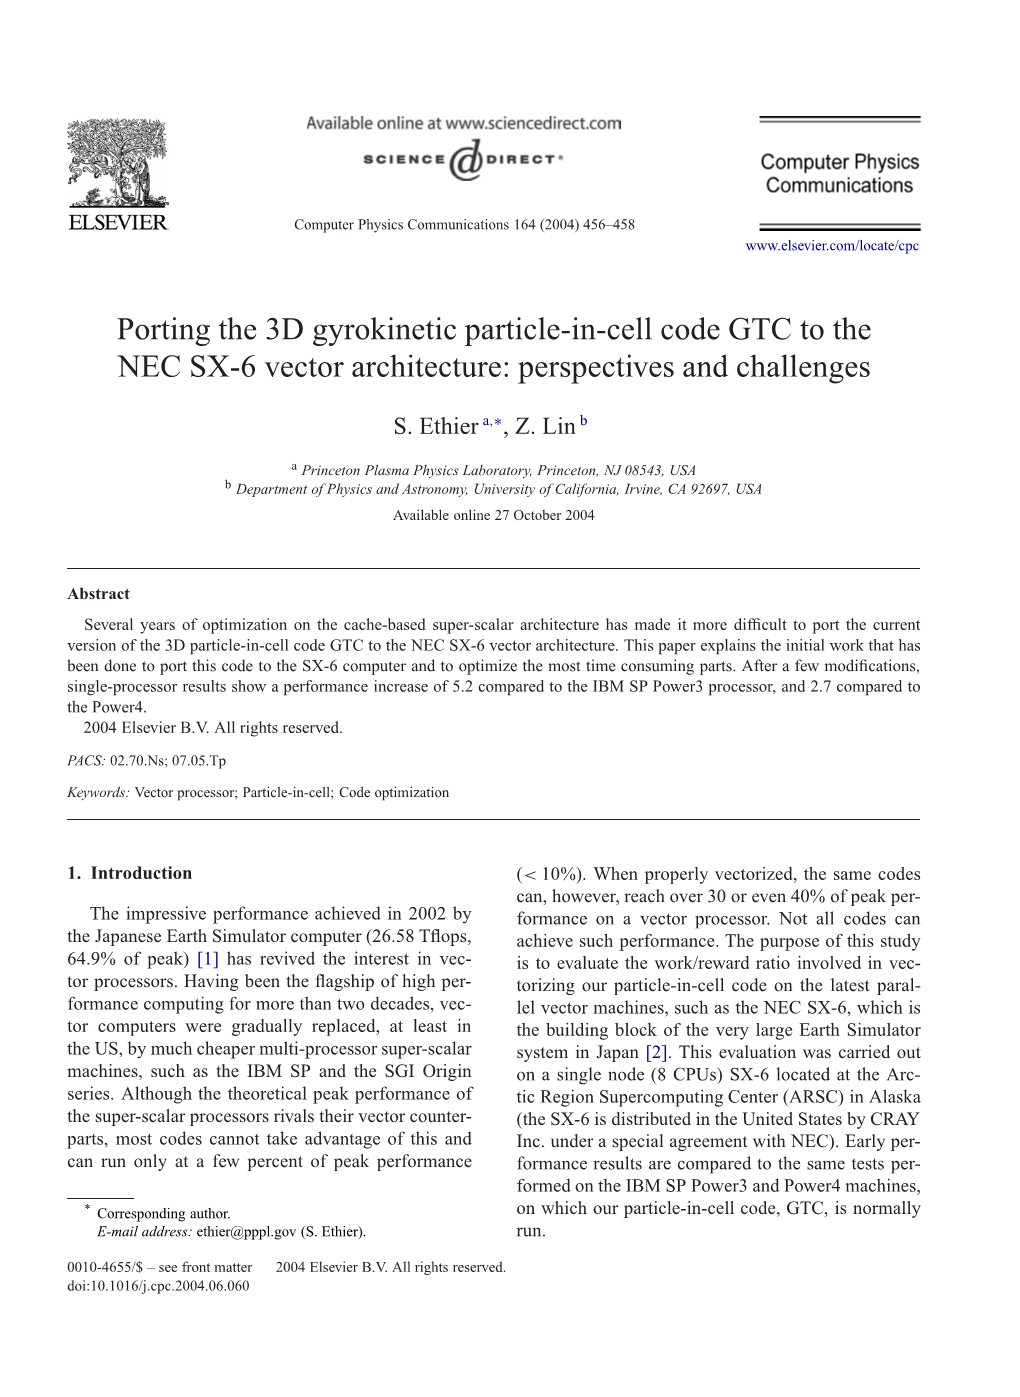 Porting the 3D Gyrokinetic Particle-In-Cell Code GTC to the NEC SX-6 Vector Architecture: Perspectives and Challenges